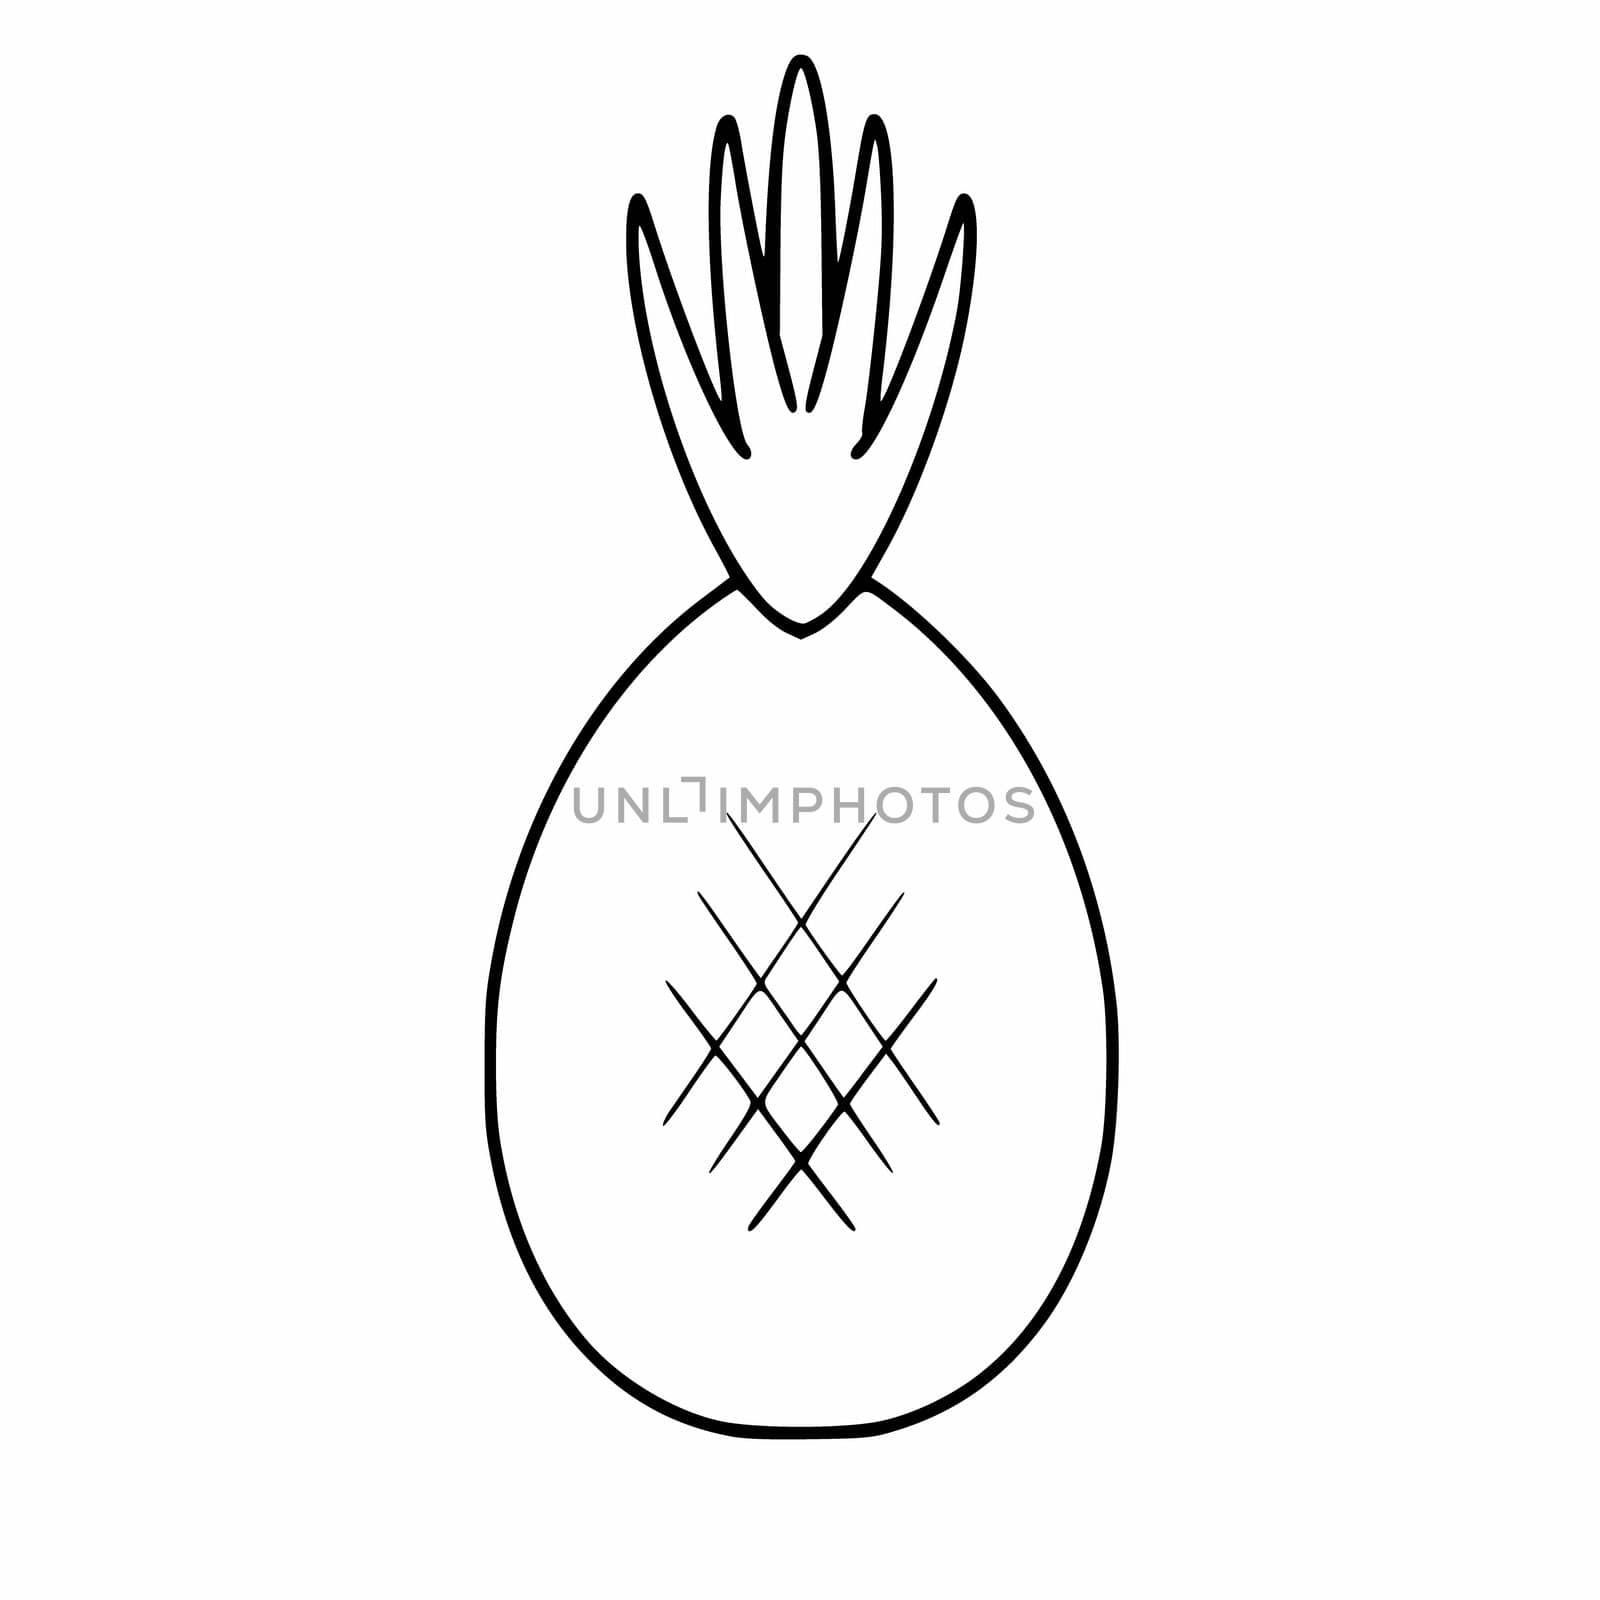 Pineapple in Doodle style. Vector illustration of a pineapple by hand. Summer fruits and vegetables. by polinka_art